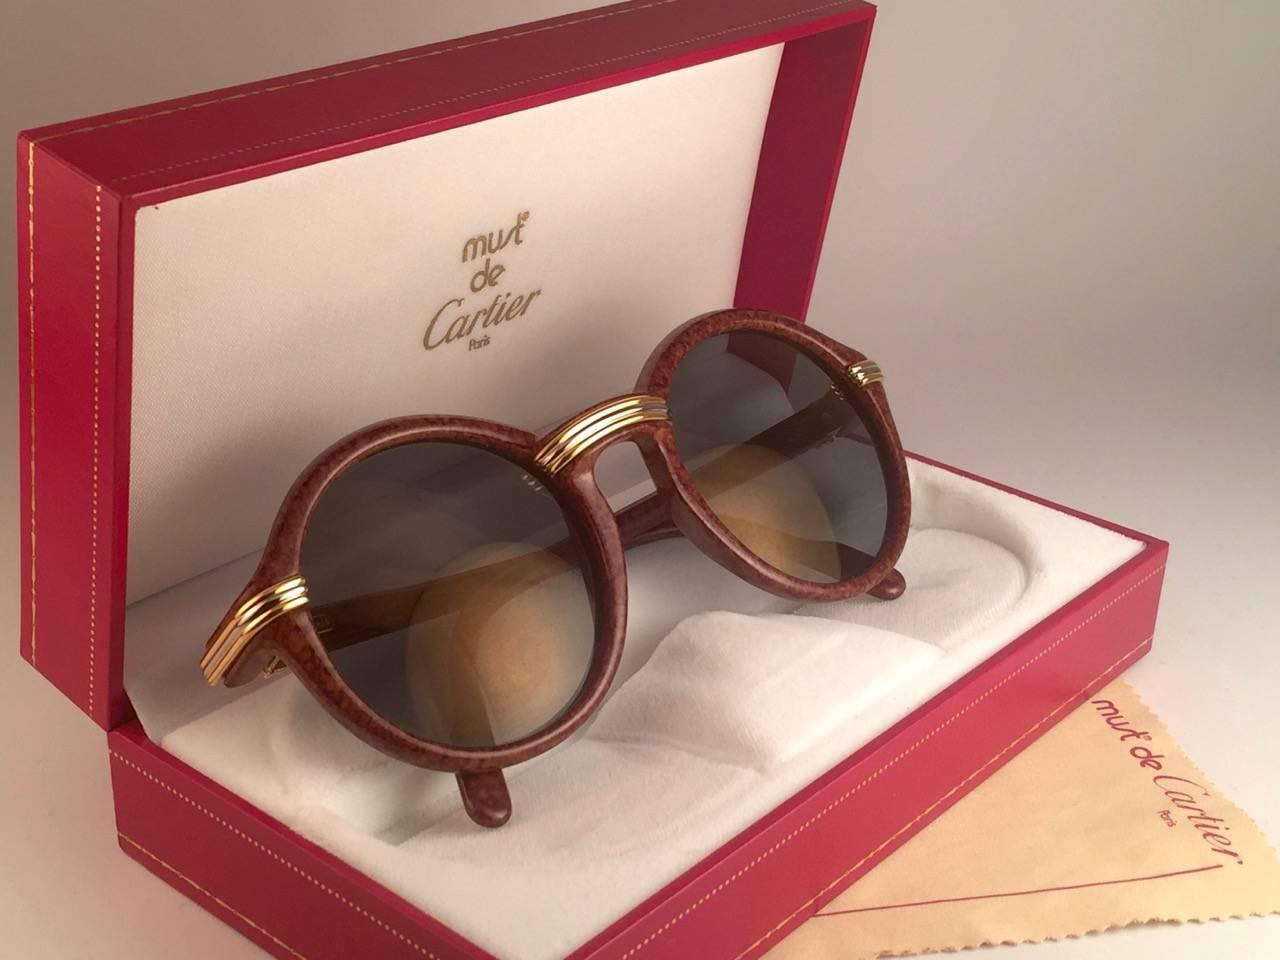 New 1991 Original Cartier Cabriolet Art Deco sunglasses with slight gold mirror ( uv protection ) lenses.
Frame has the famous real gold and white gold accents in the middle and on the sides. 
All hallmarks. Cartier gold signs on the earpaddles.